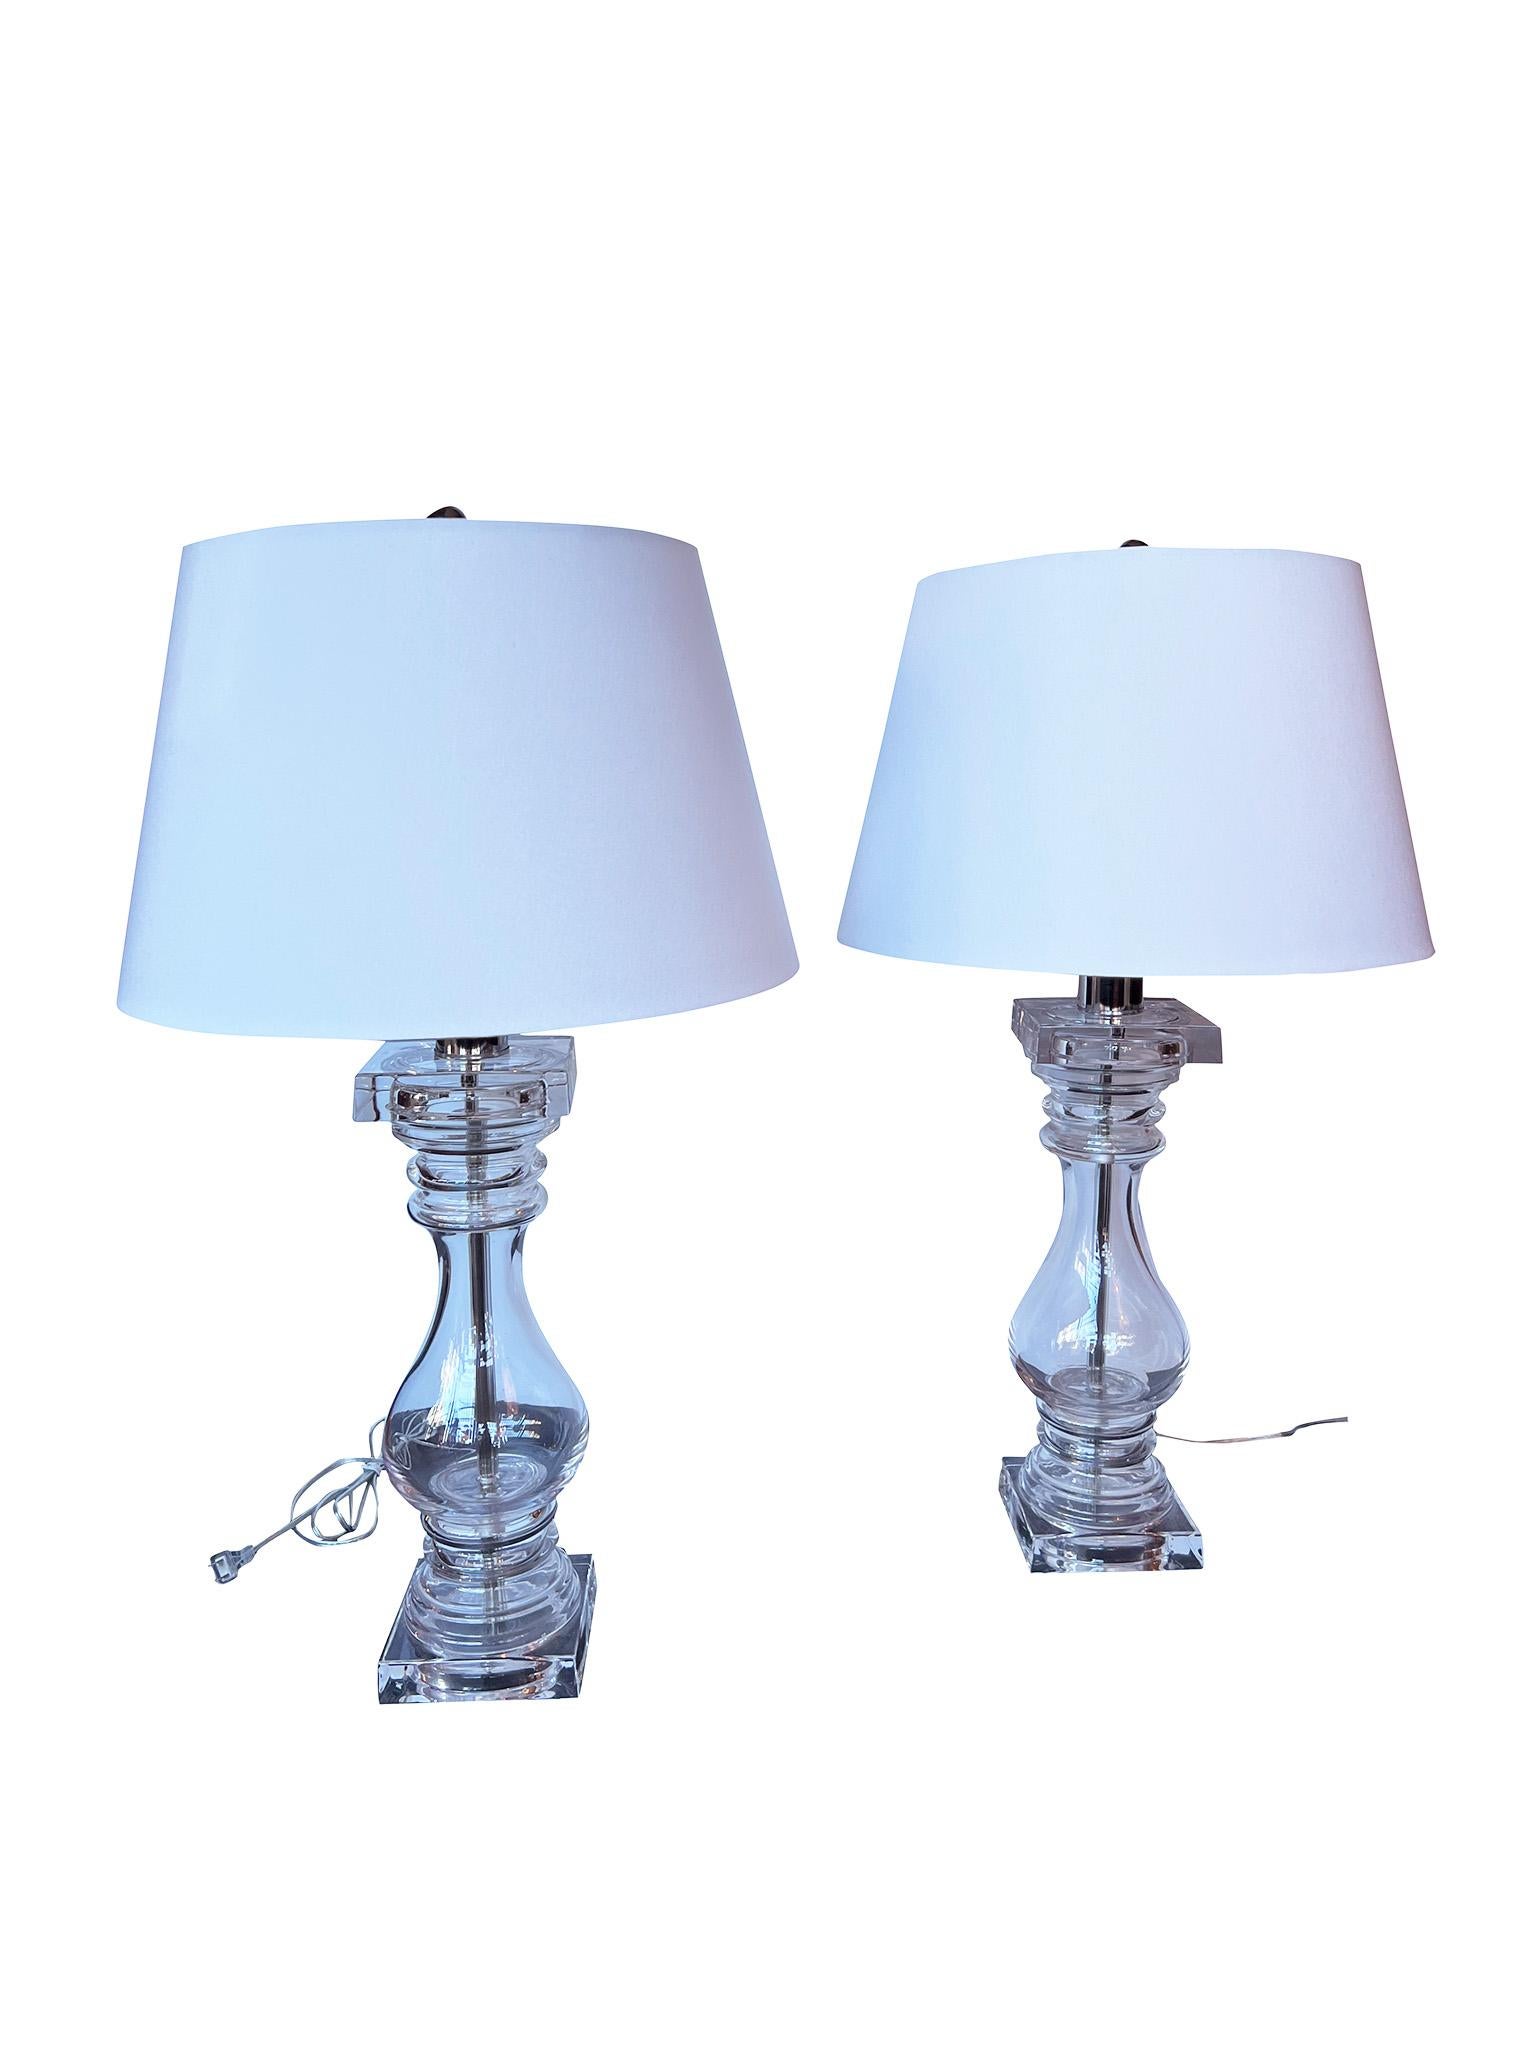 Lovely pair of 1970s baluster shaped table lamps crafted by Chapman Glass. Characterized with mirrored thick square bases and tops, the clear glass is accented by original chrome fittings. One of the sockets has a sticker that reads 